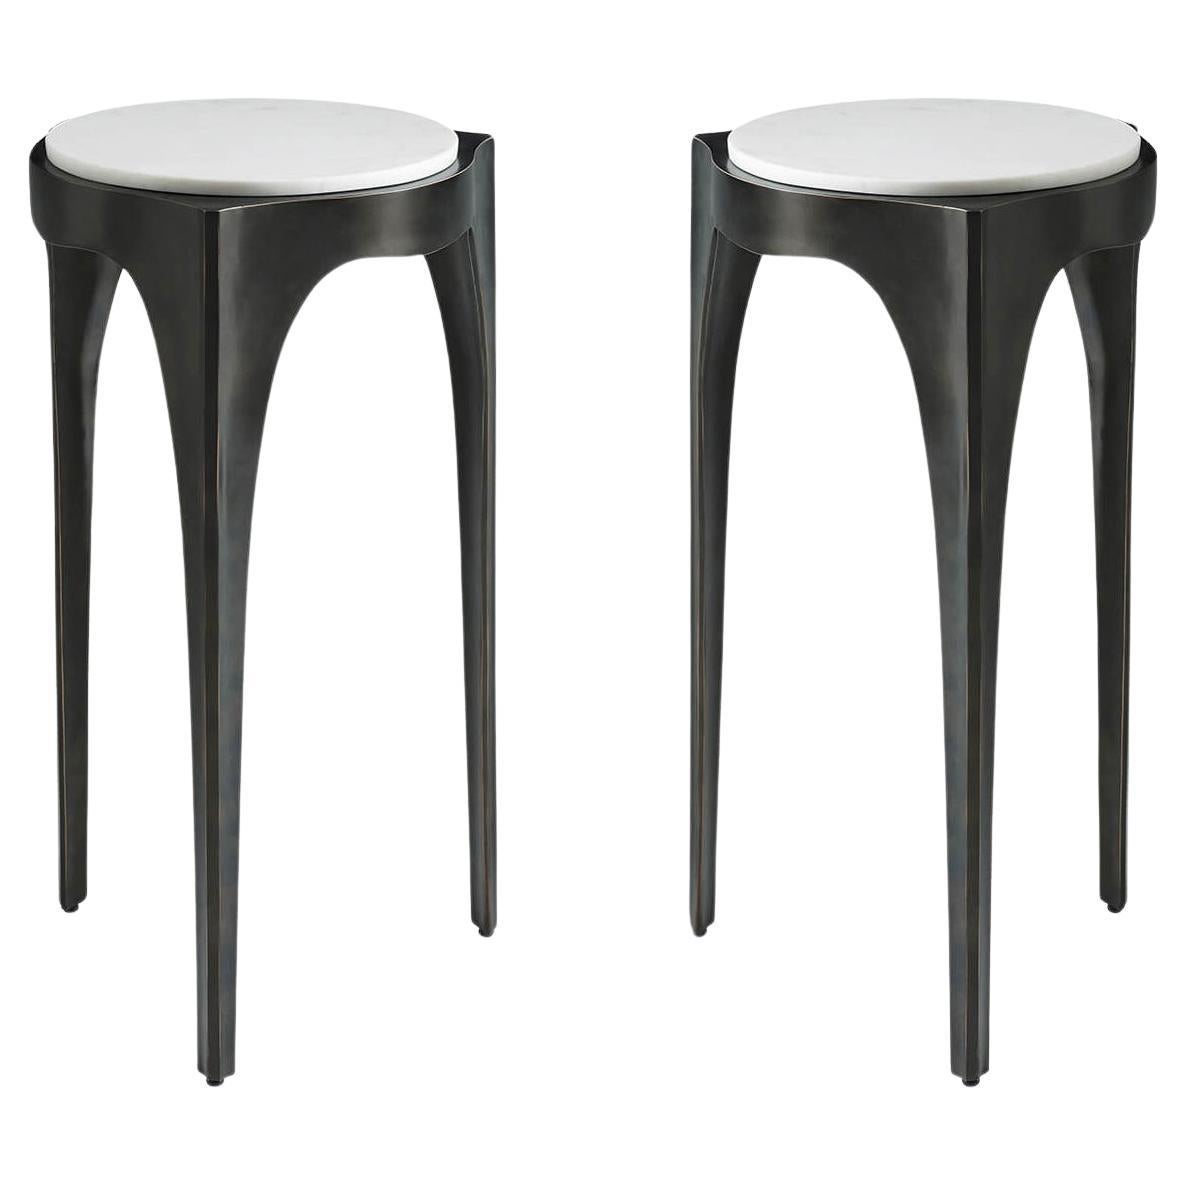 Pair of Italian Modernist Accent Tables